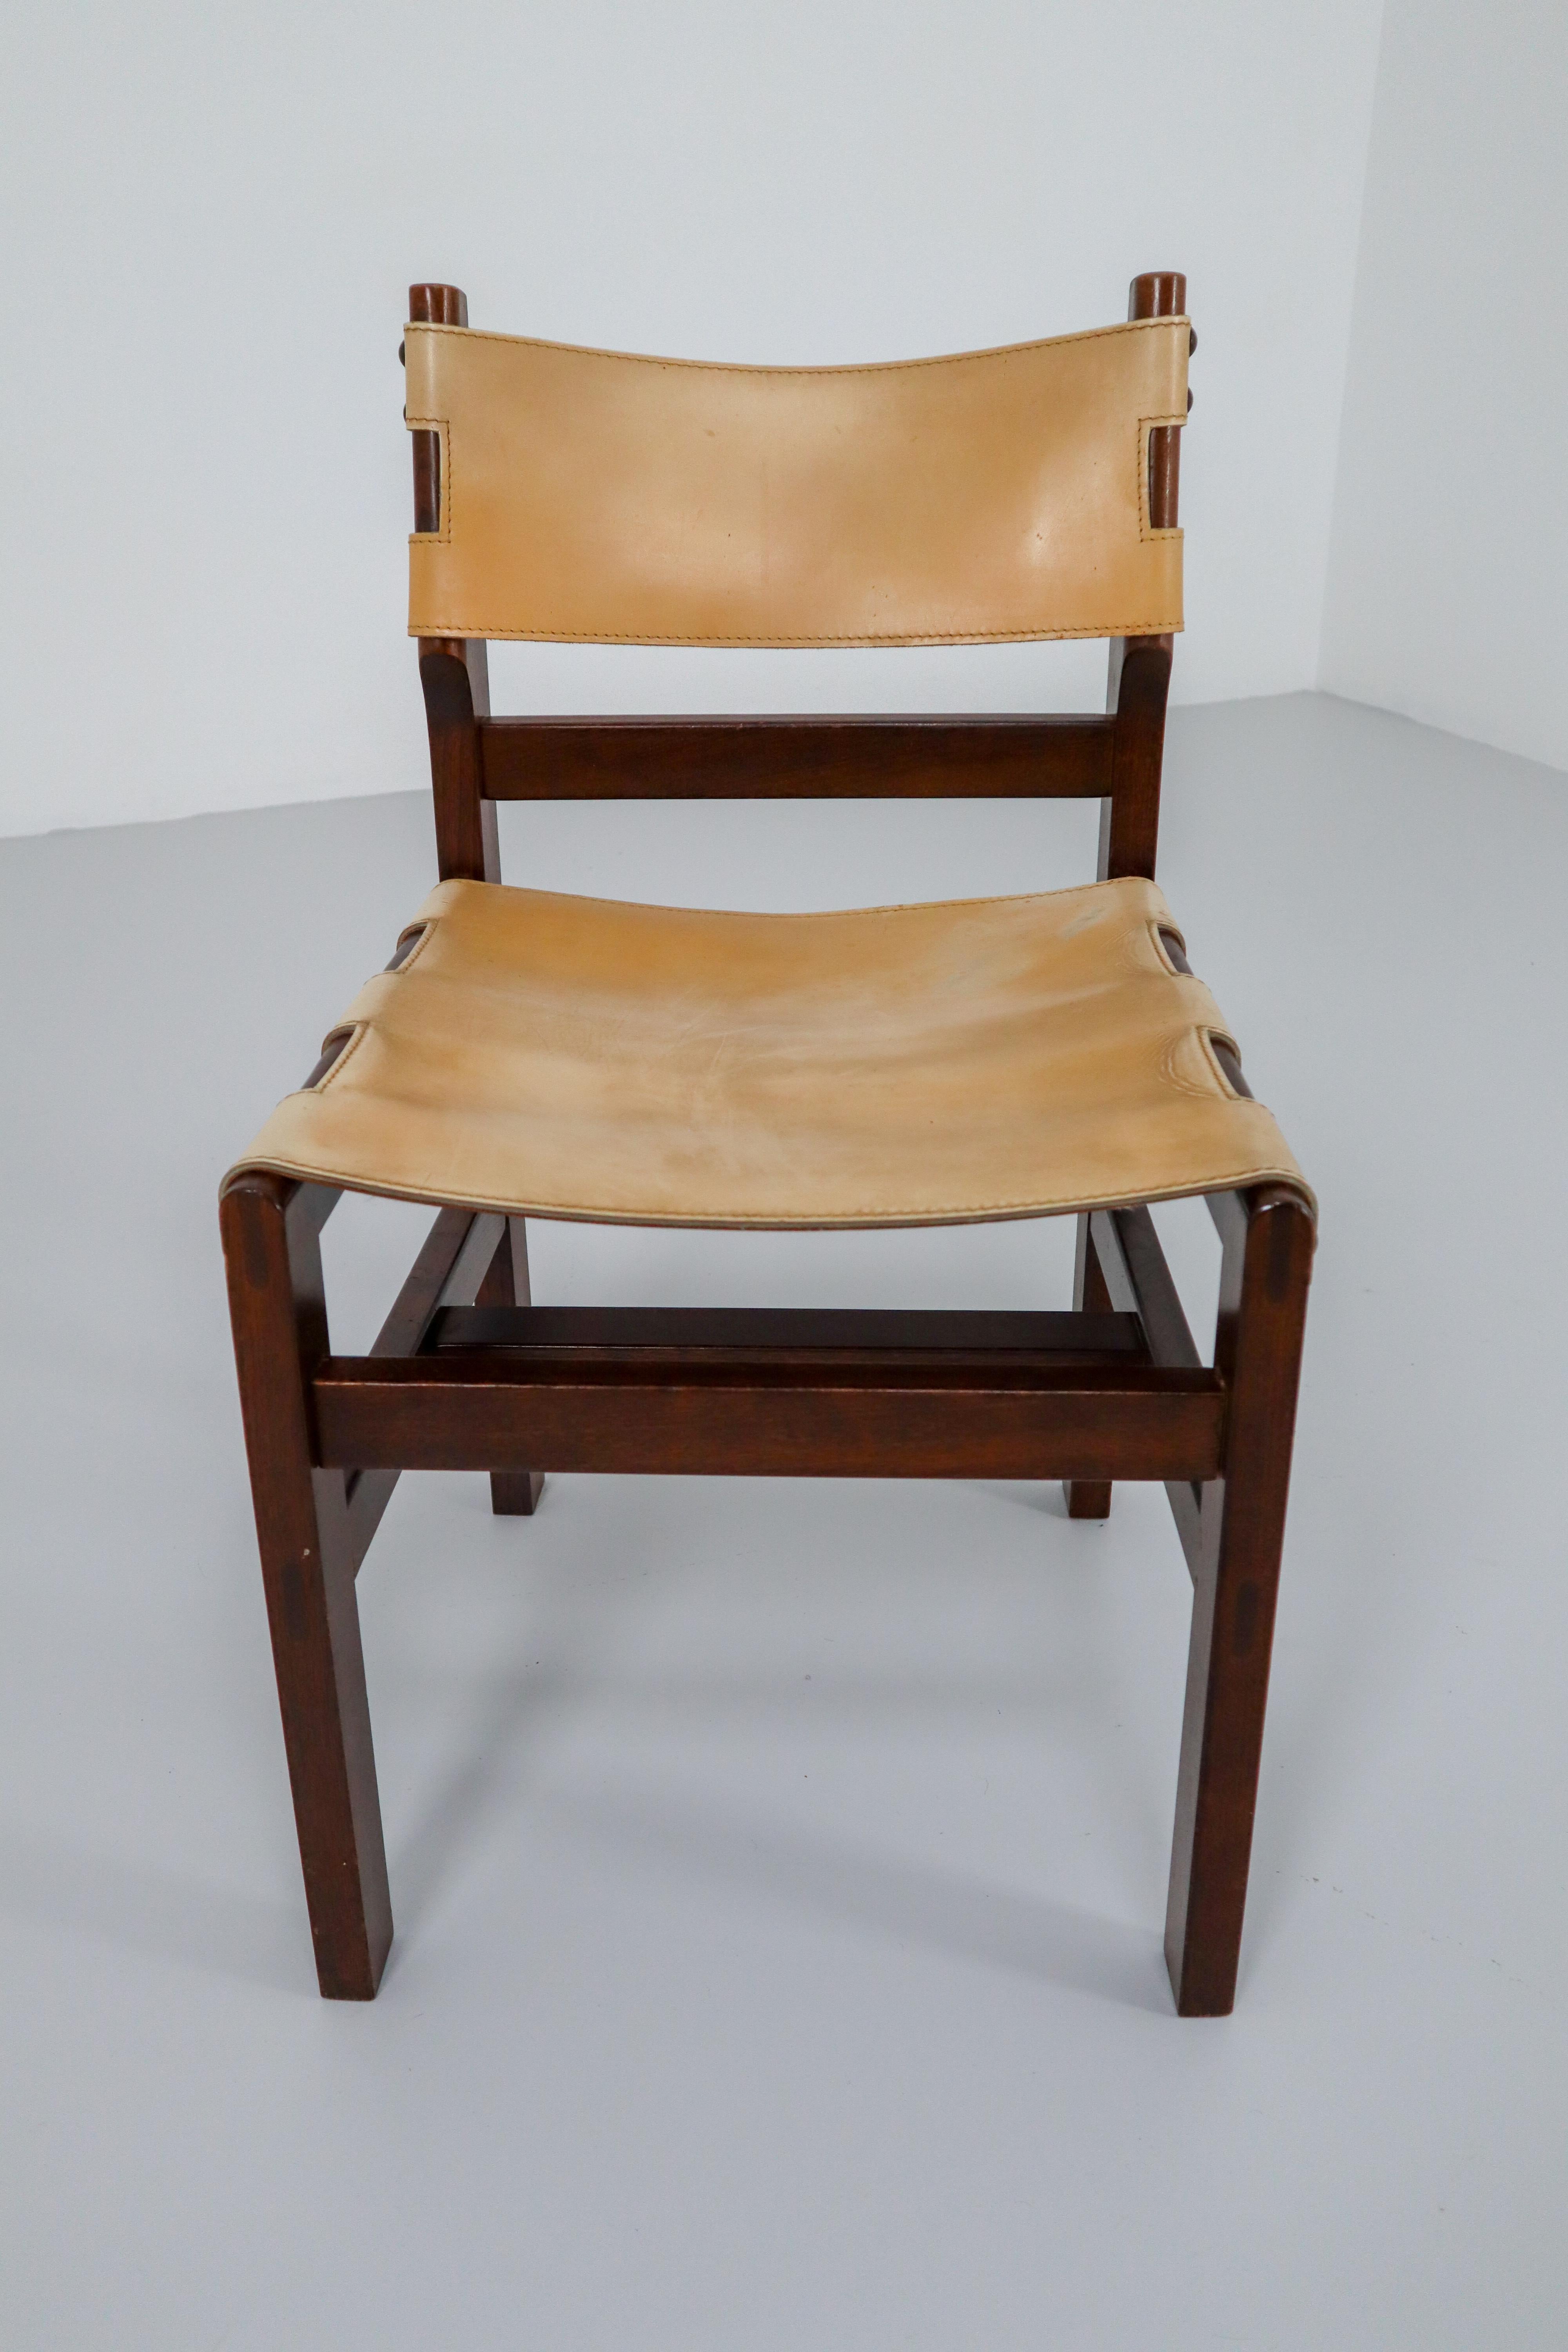 French Provincial Set of Four Midcentury Chairs in Beech and Leather, France, 1960s